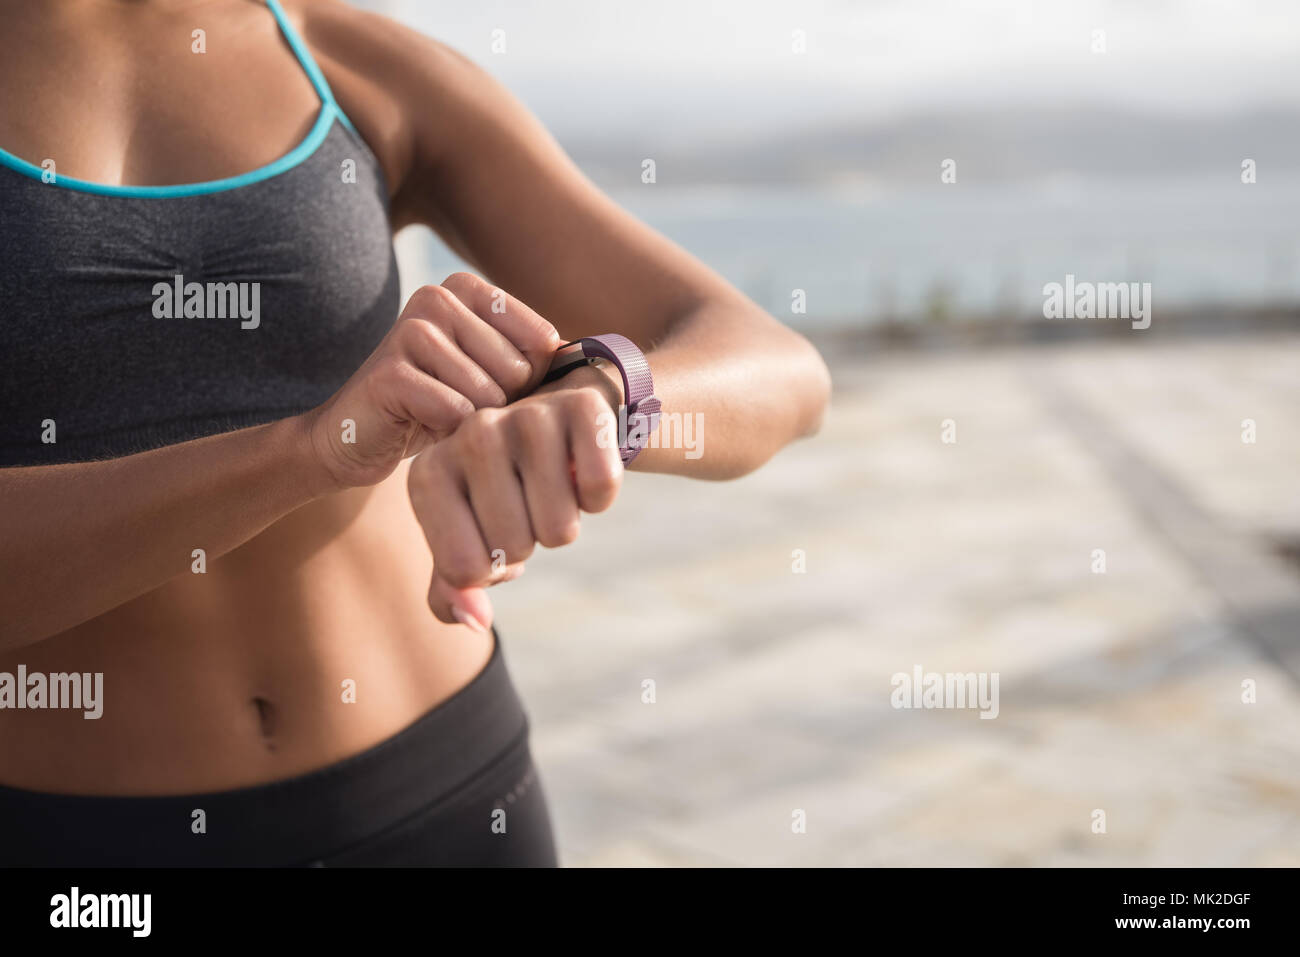 A woman in fitness clothing touching her smartwatch with her midriff and chest in the image and the sea in the background Stock Photo